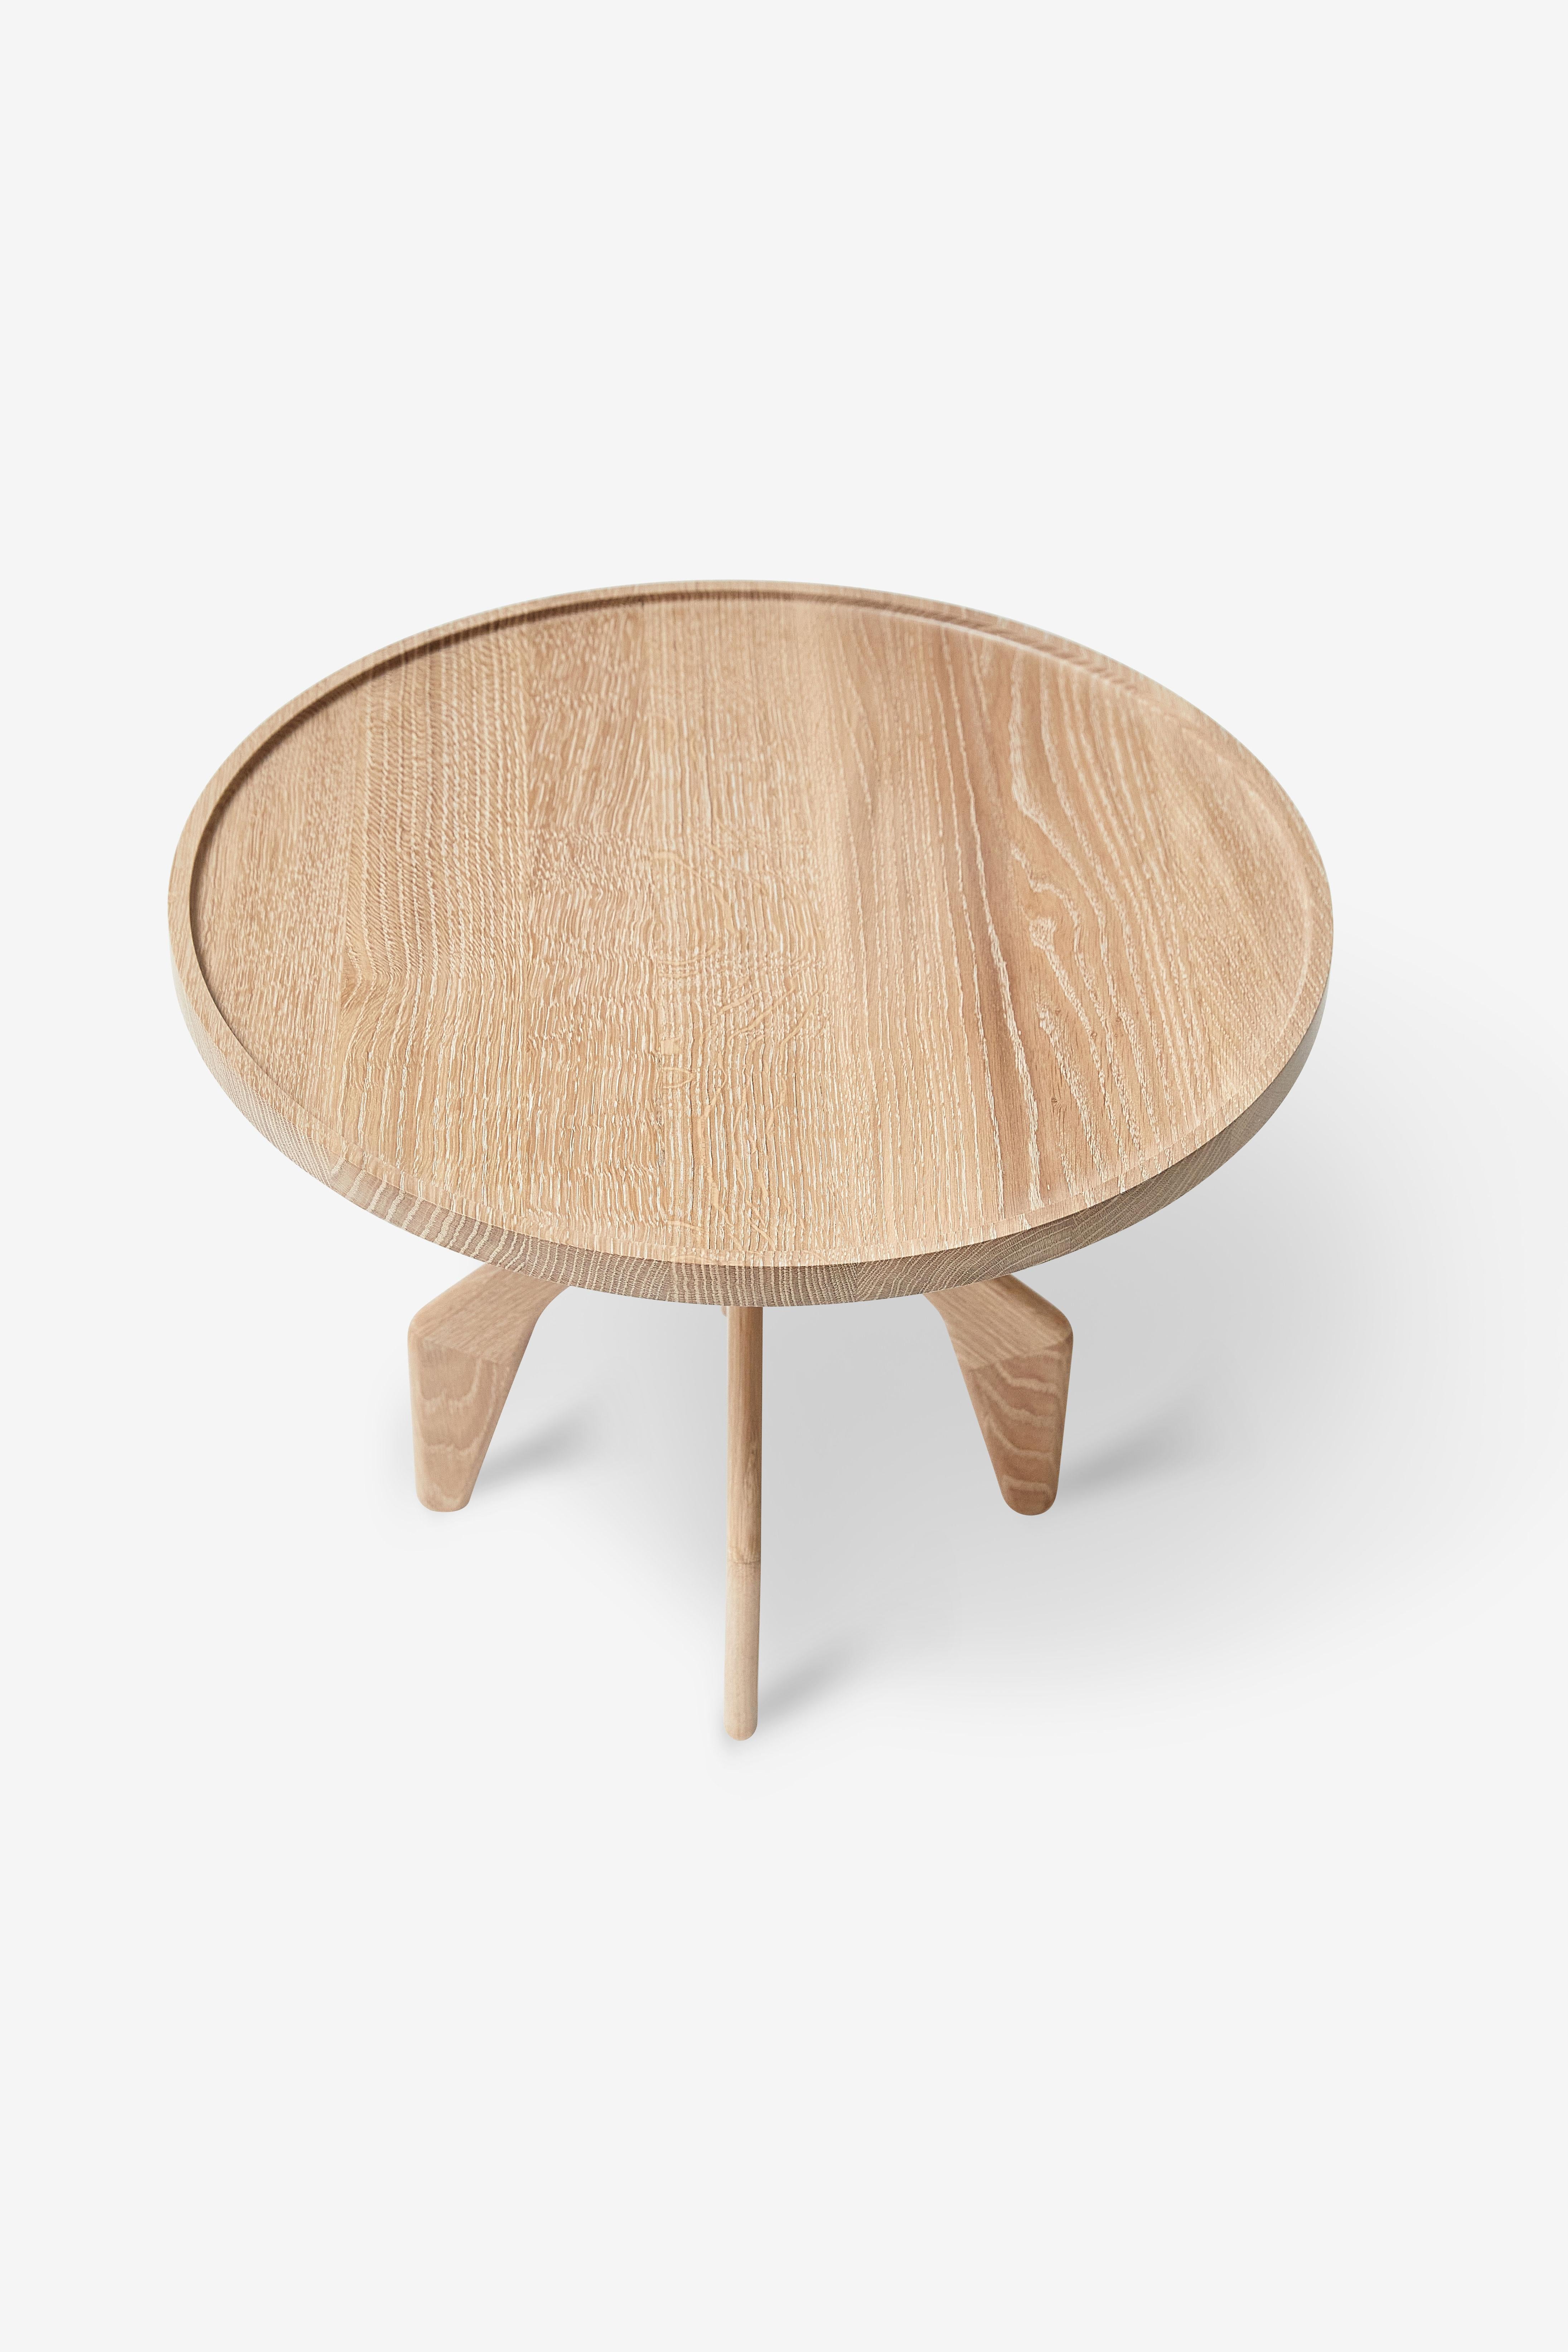 MG205 Side table made in solid oak. Originally the table was designed and made for the first Noma restaurant's lounge at Strandgade in Copenhagen.

Evolving from a body of works realised over the last decade between Malte Gormsen Møbelsnedkeri and